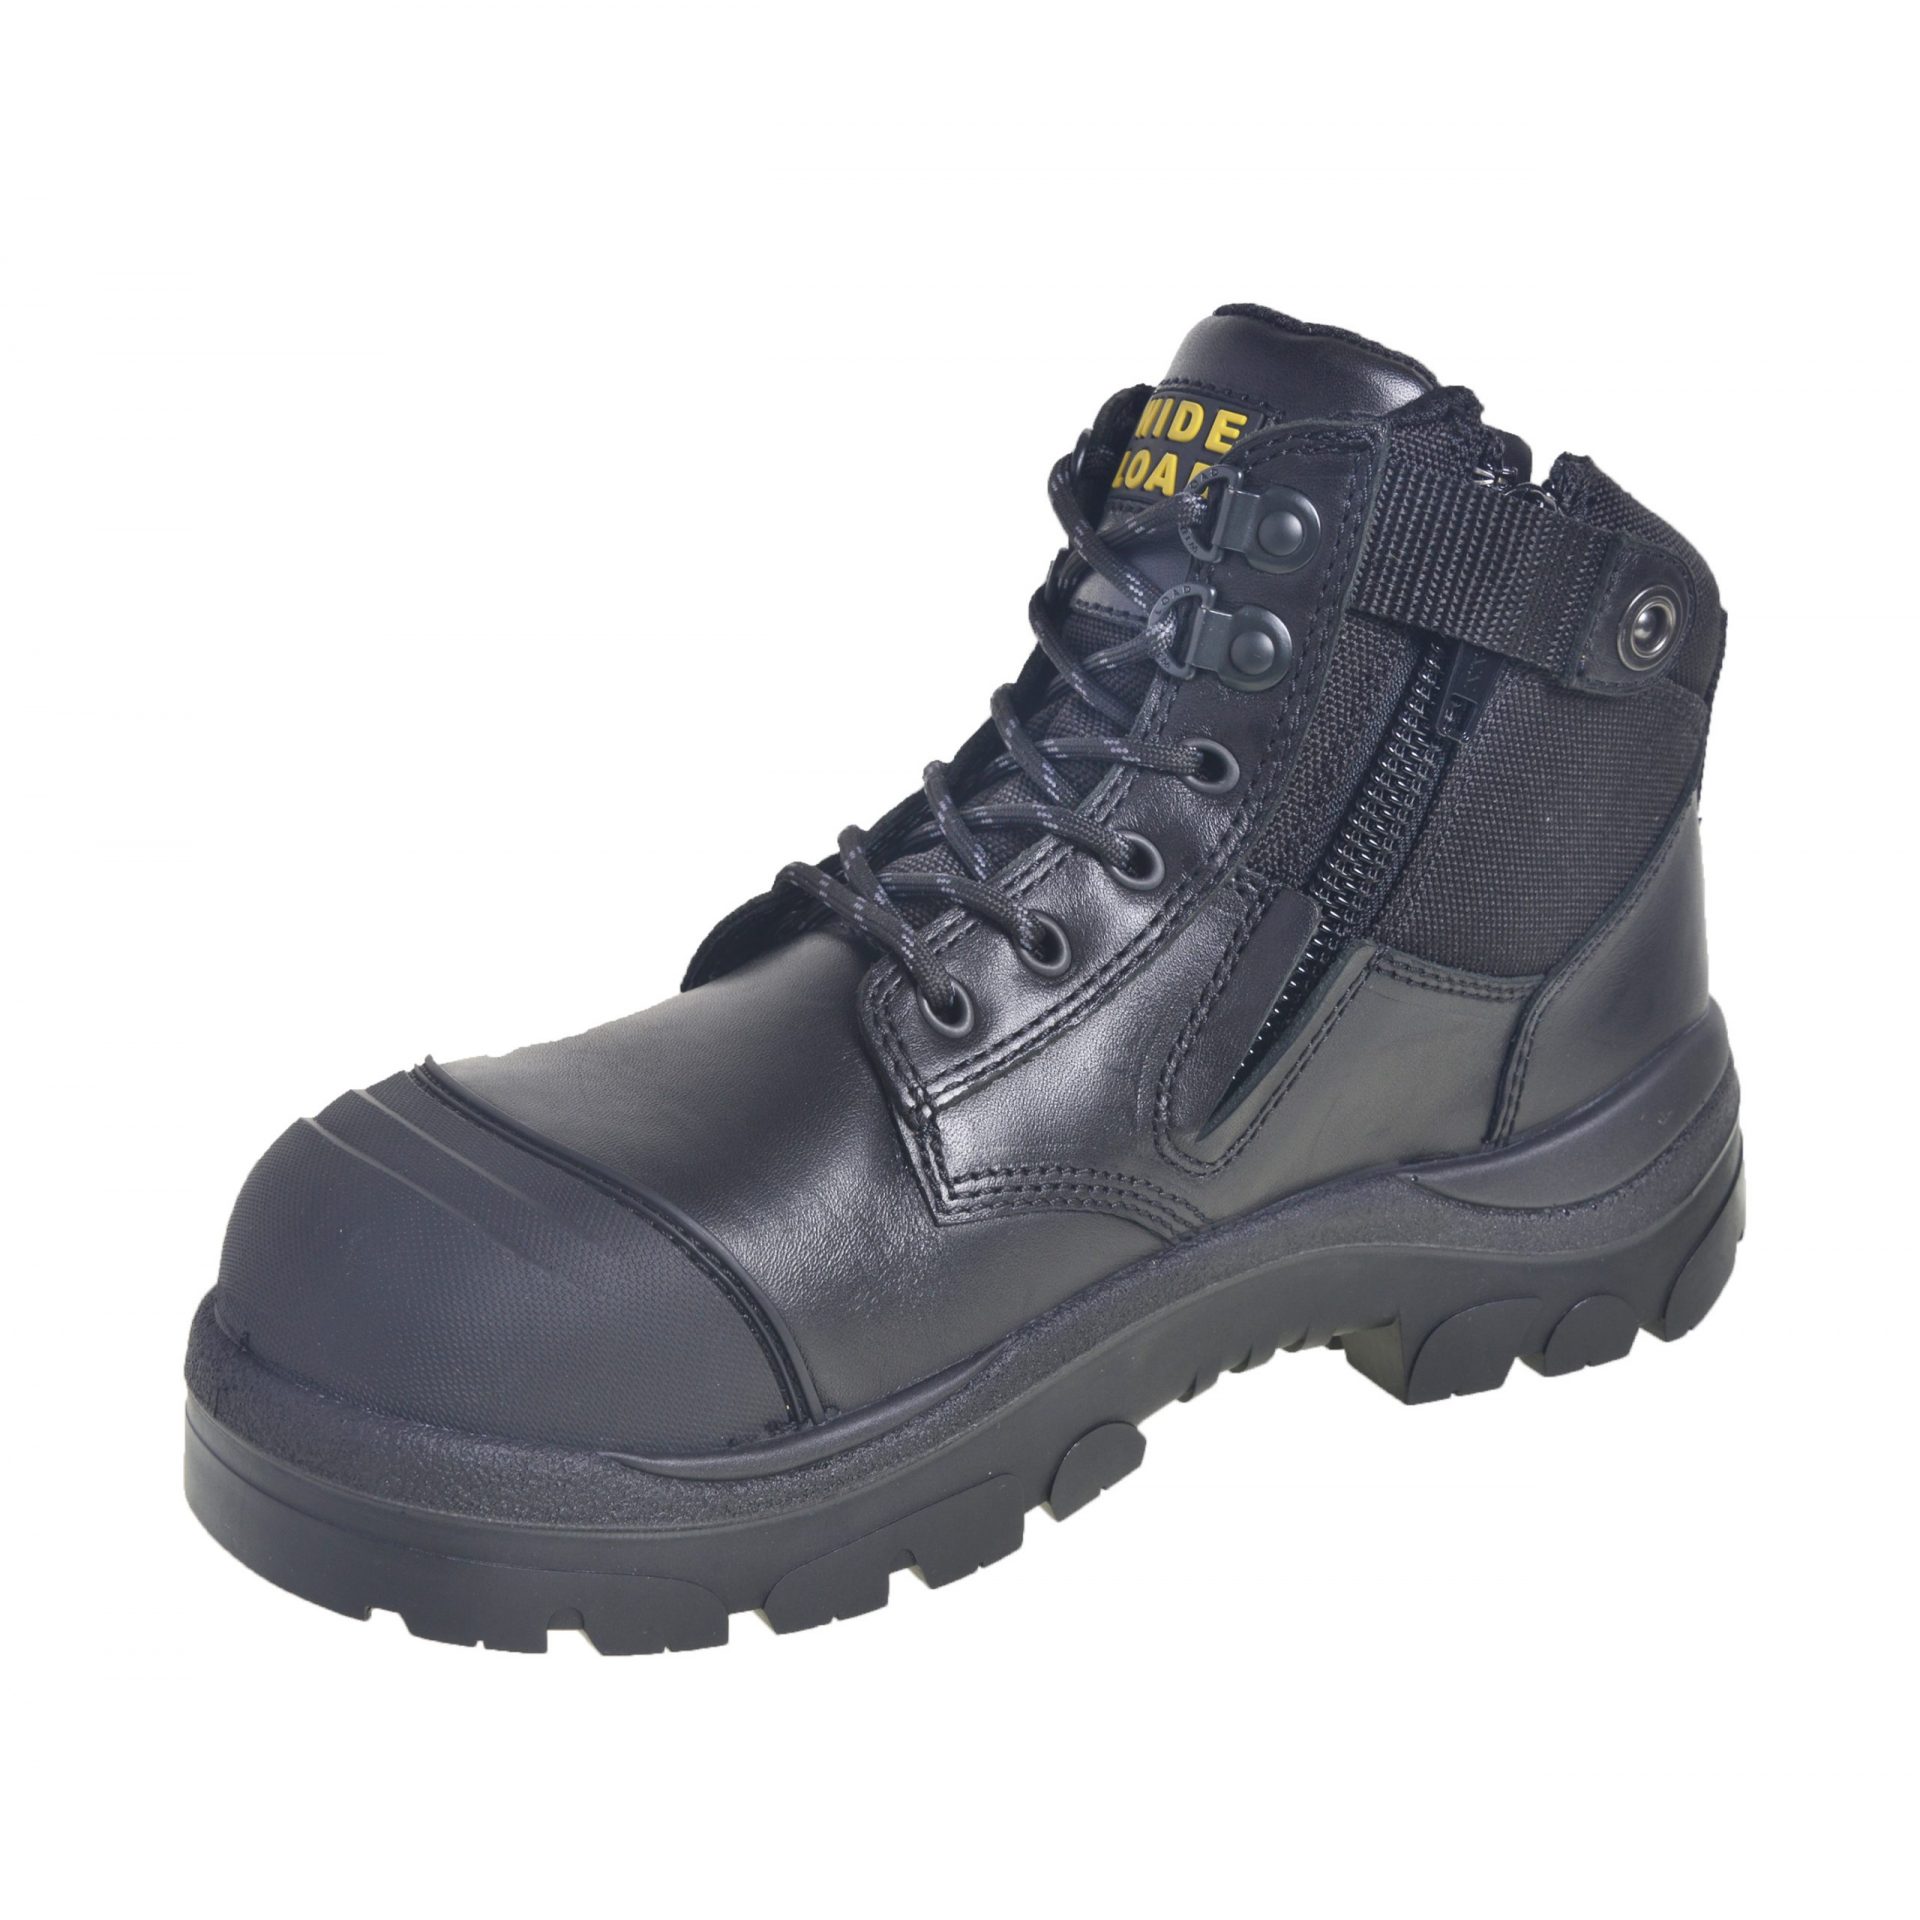 steel toe boots with wide toe box